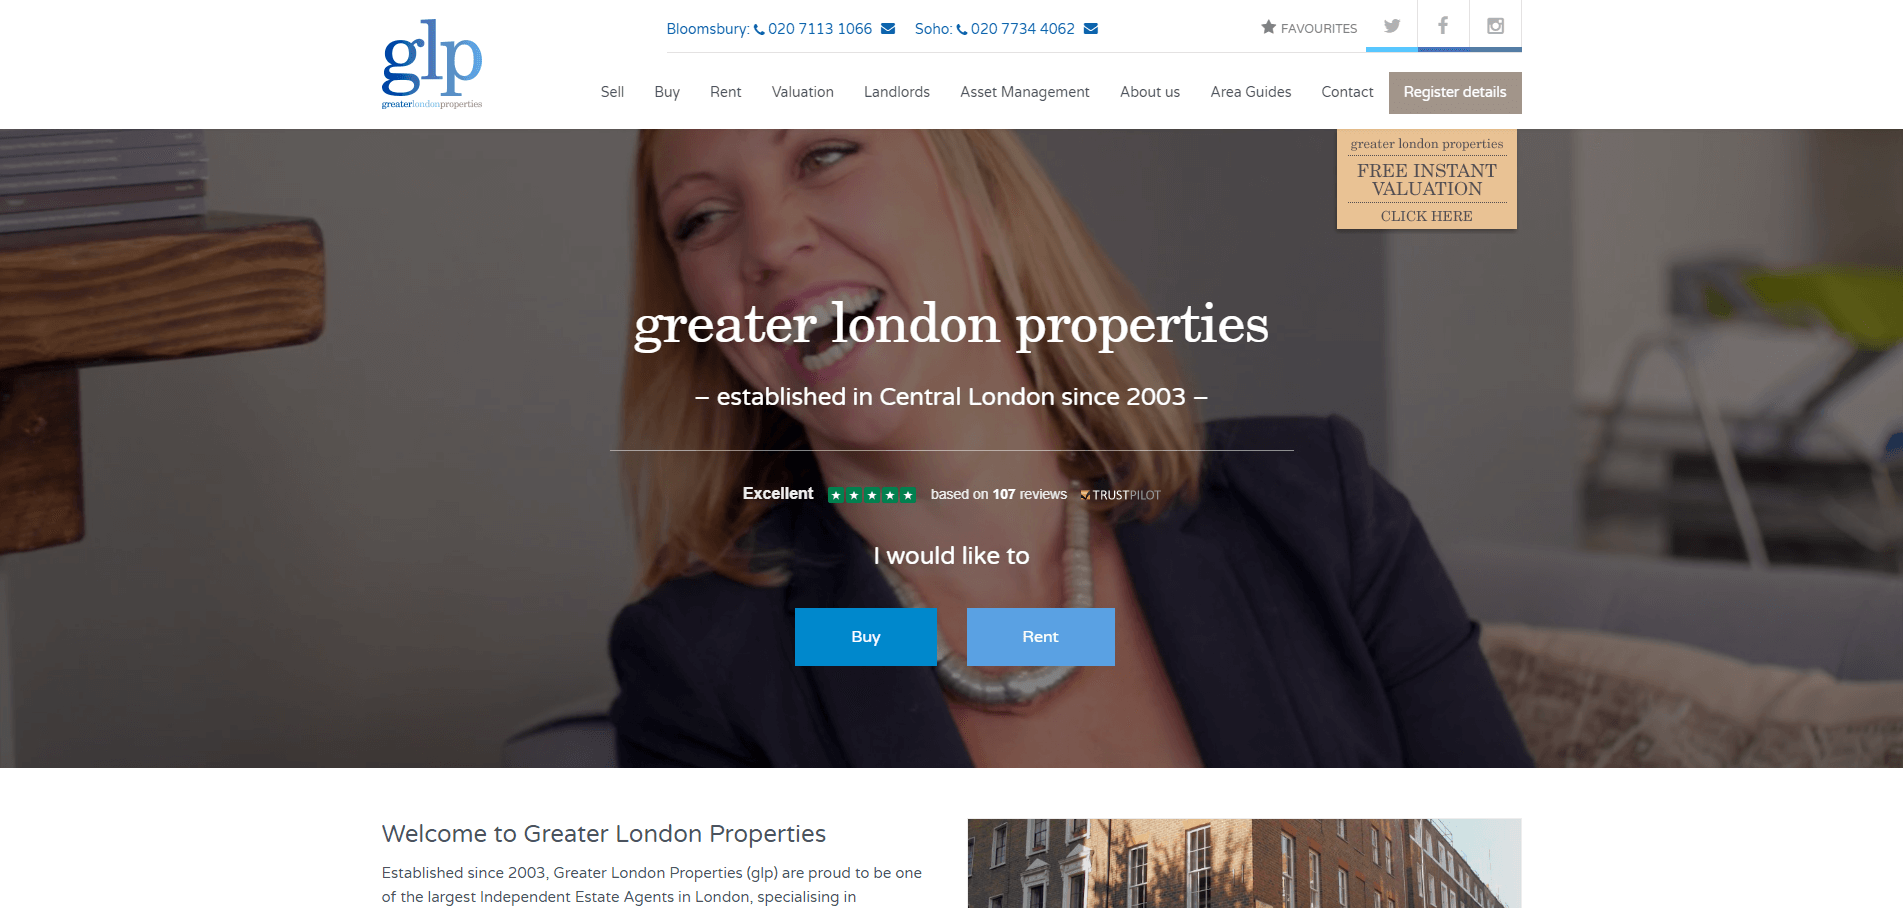  Whoa!  We made a list of the 101 best real estate websites.  Each site is ranked 1-101 with a description and review.  Here's greaterlondonproperties.co.uk. 